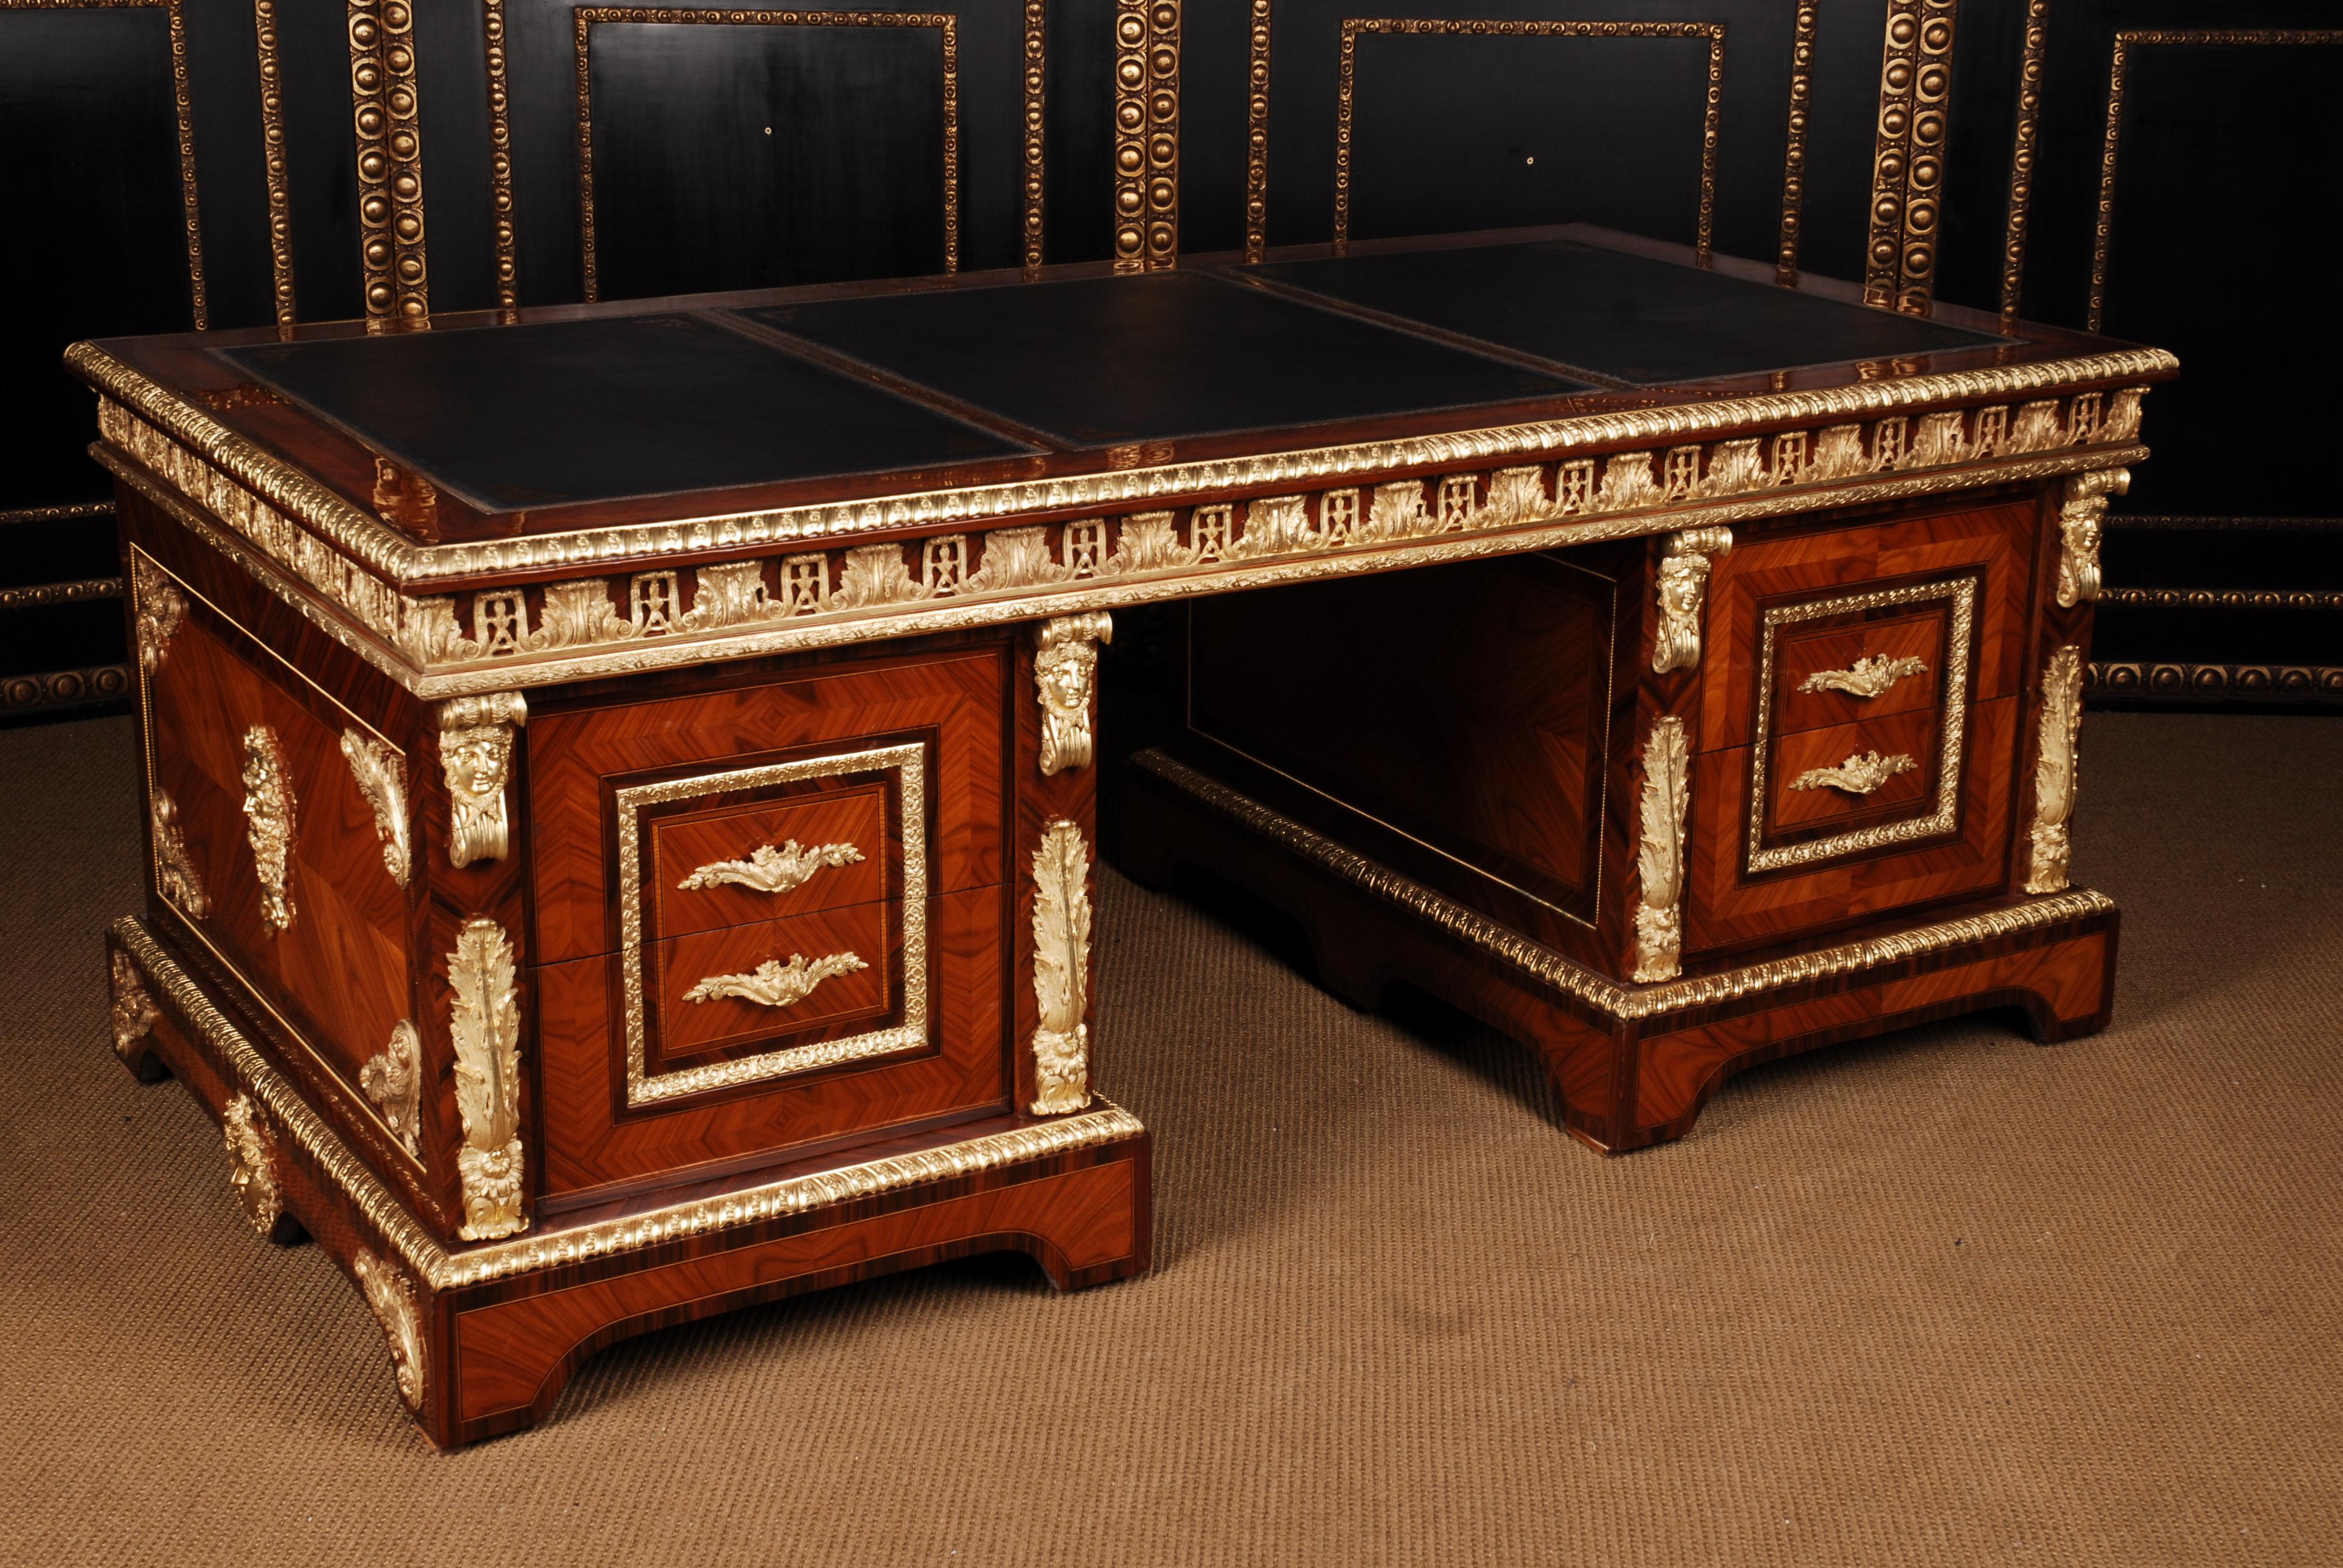 Imposing French Writing Table in Style of Louis 14th
Tulip Wood on Pinewood. Three part, straight border.Narrow overlapping, wide framed writing plate, middle laid, gold embossed Leathe rsurface. Underneath, three drawers of varying sizes with